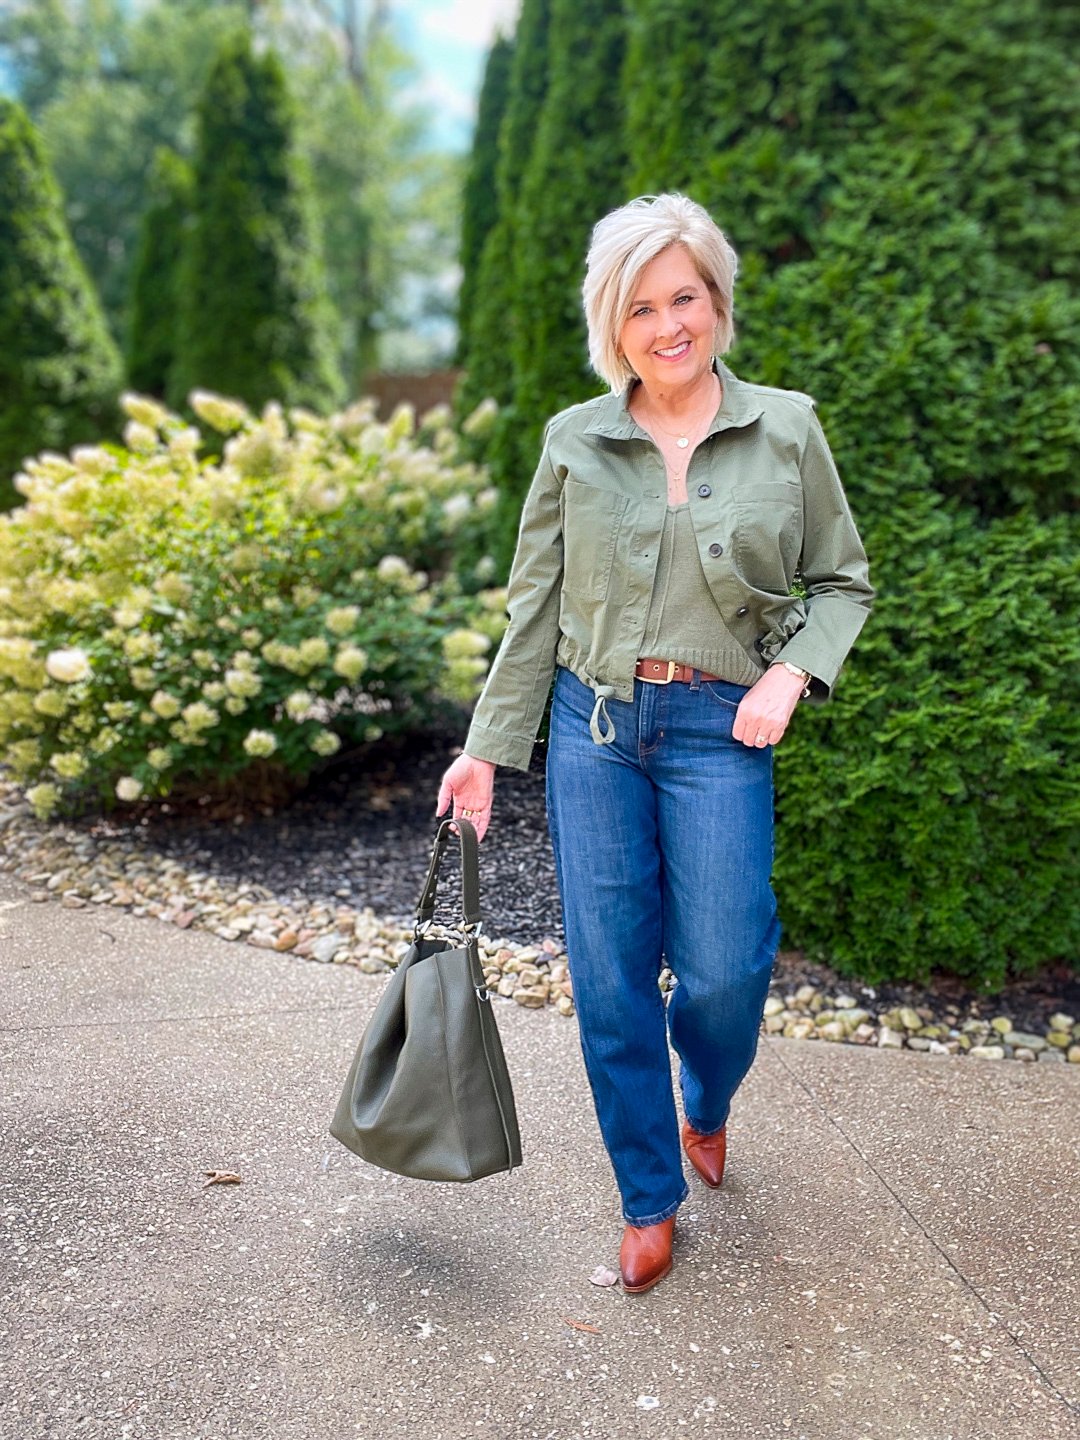 Over 40 Fashion Blogger, Tania Stephens is wearing an olive green jacket and sweater tank from Banana Republic10